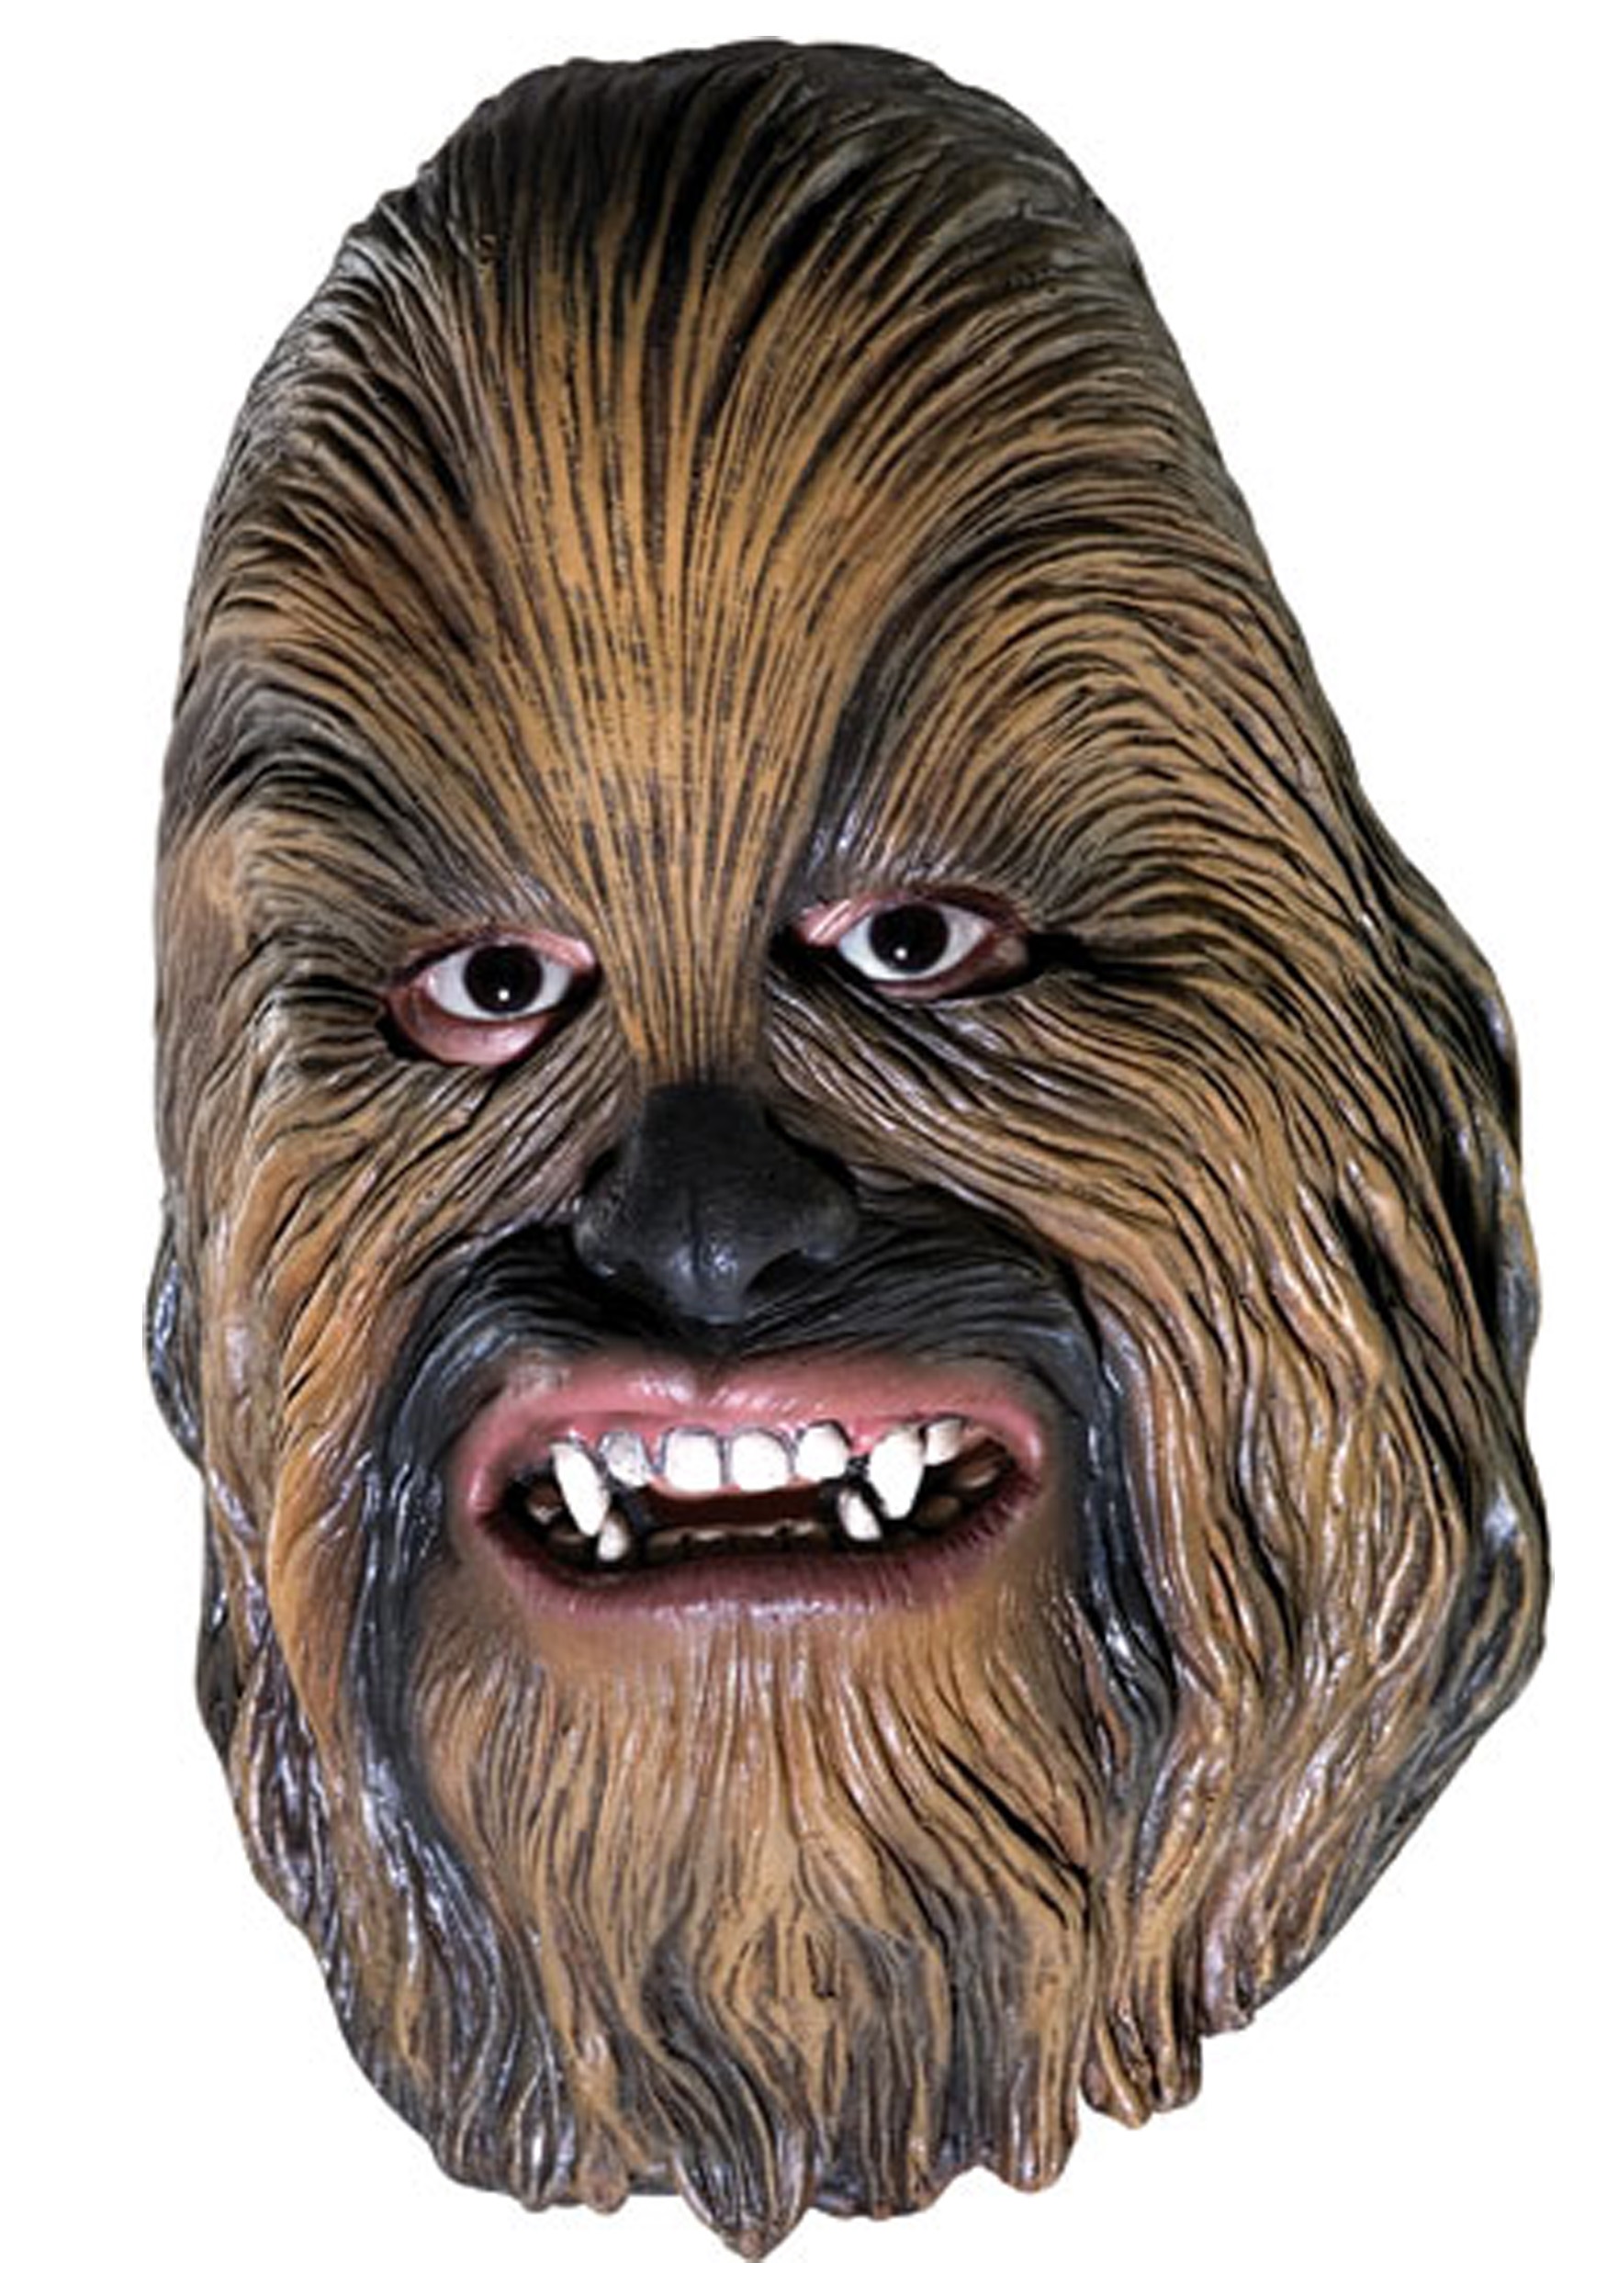 NOVELTY GIFT "Star Wars" Face Mask CHEWBACCA 